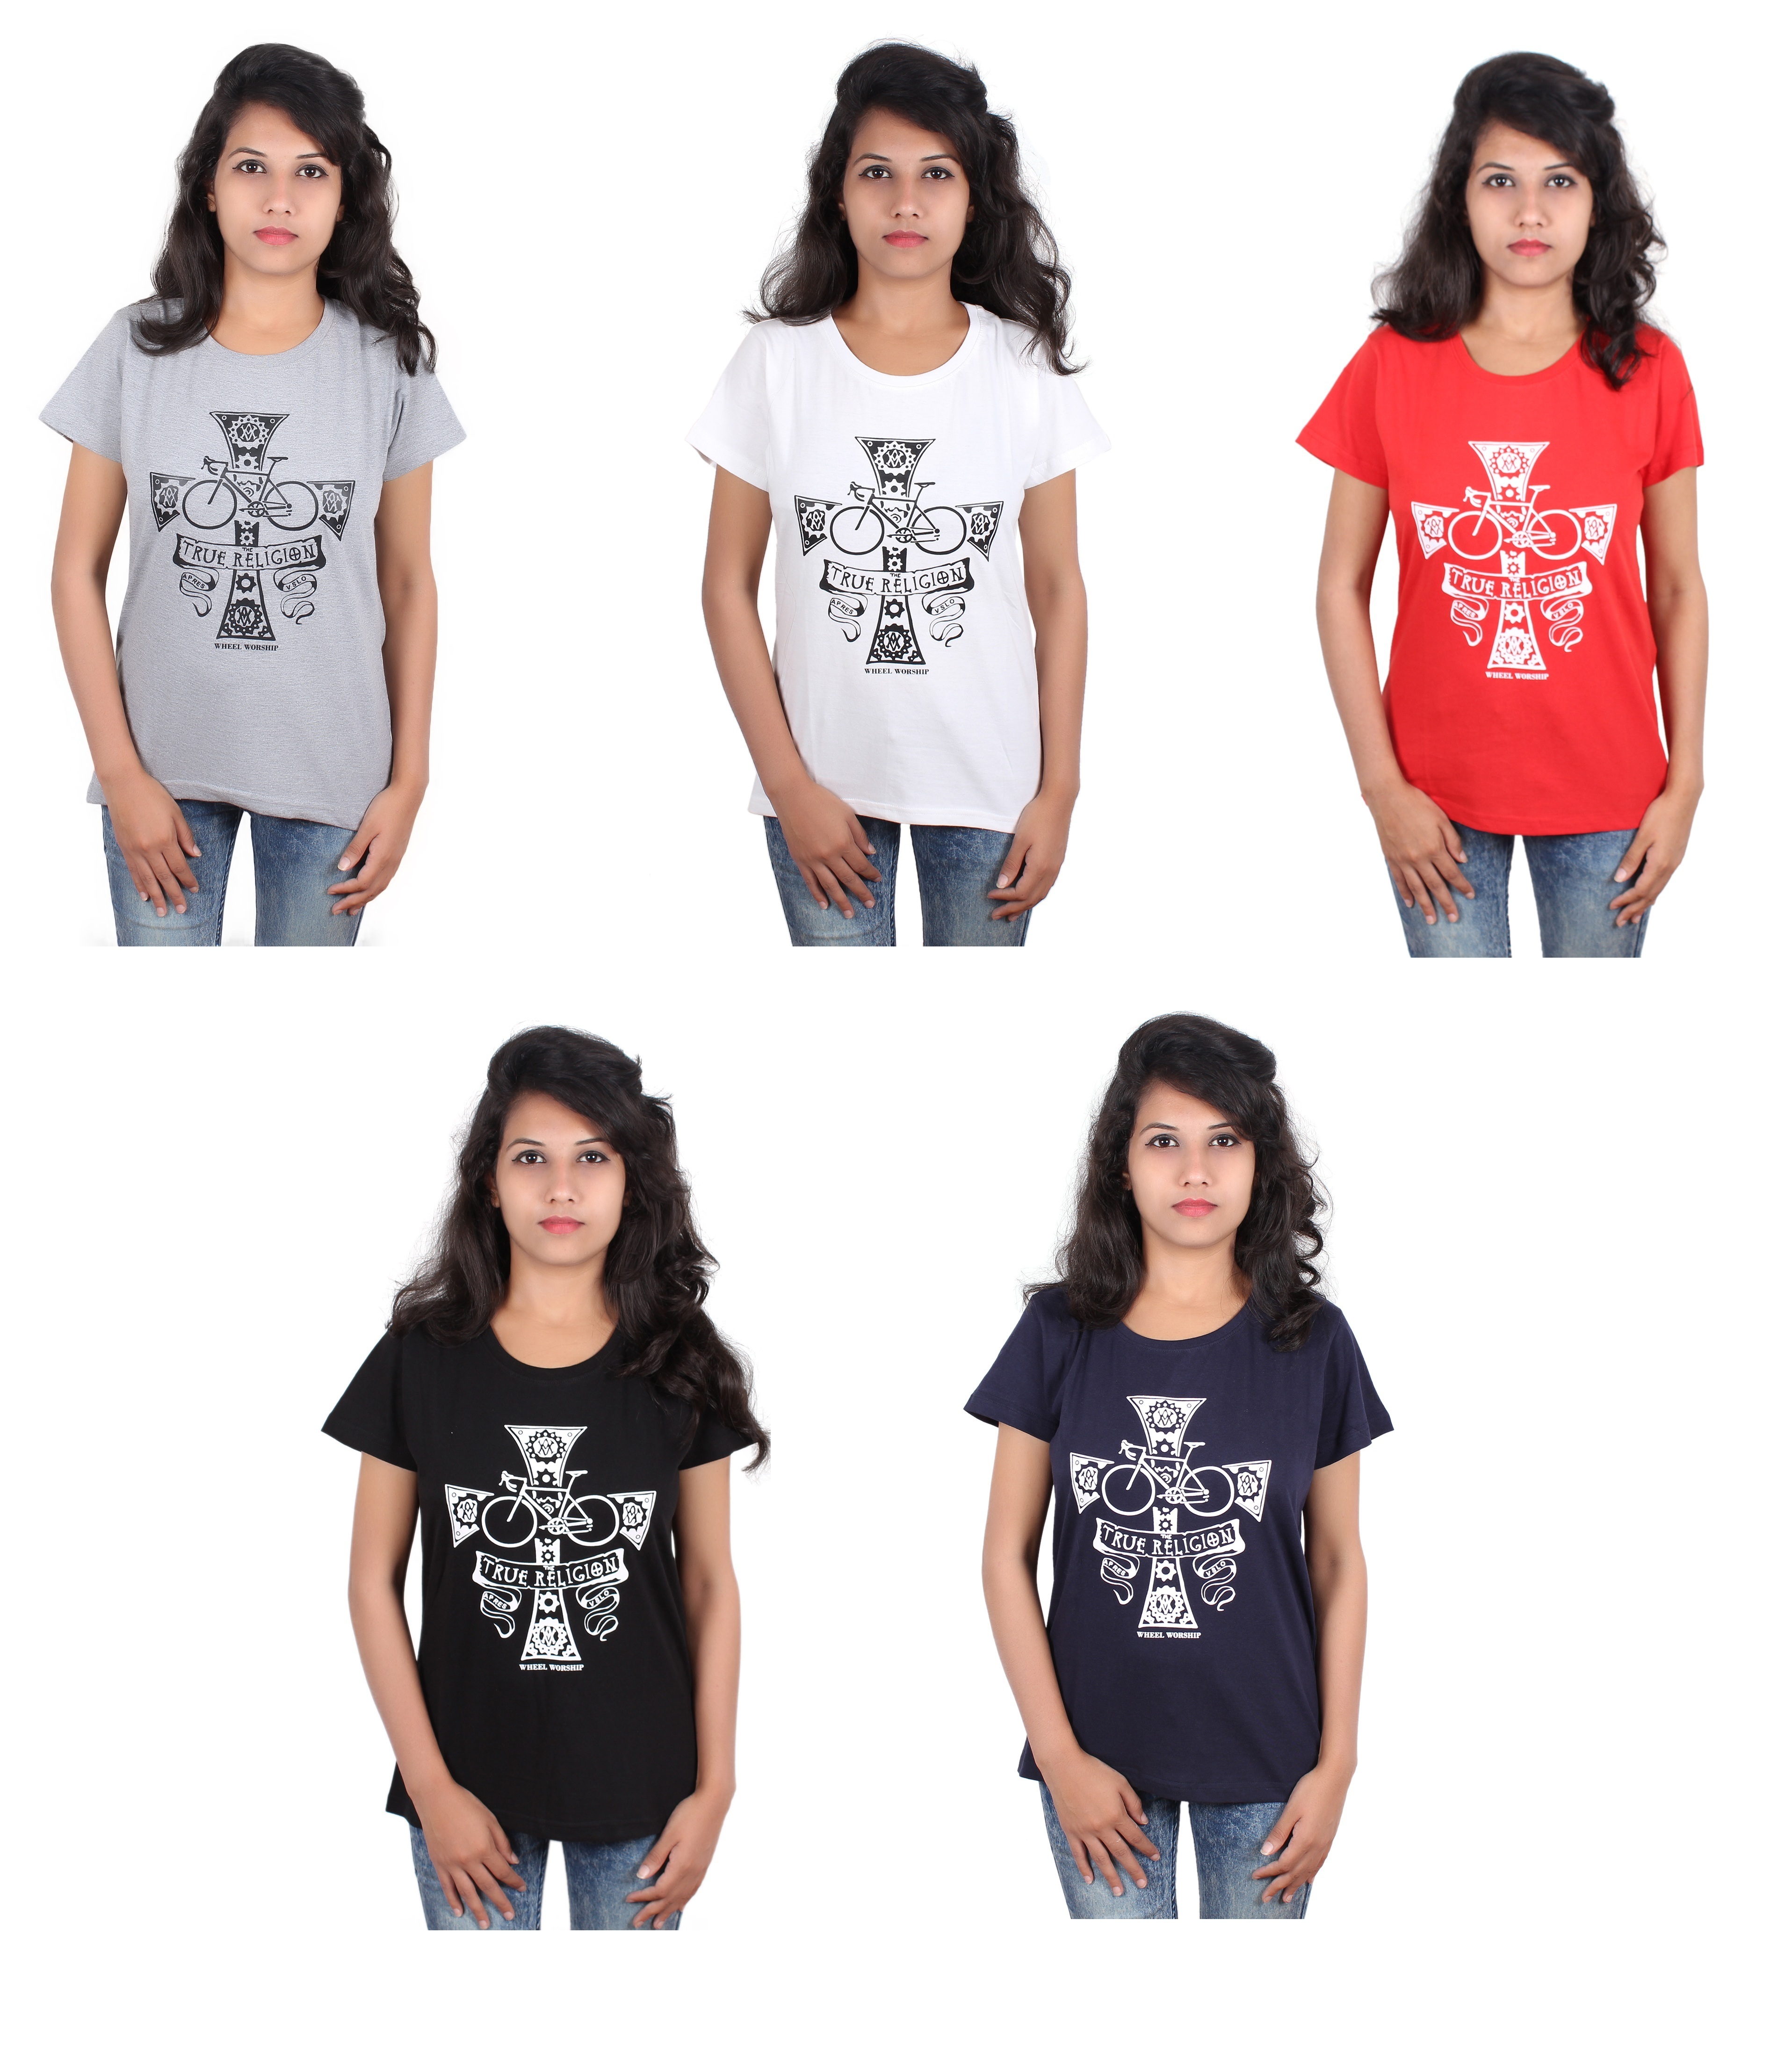 Branded Trifoi Ladies Tshirts / Tops with bill for resale in India